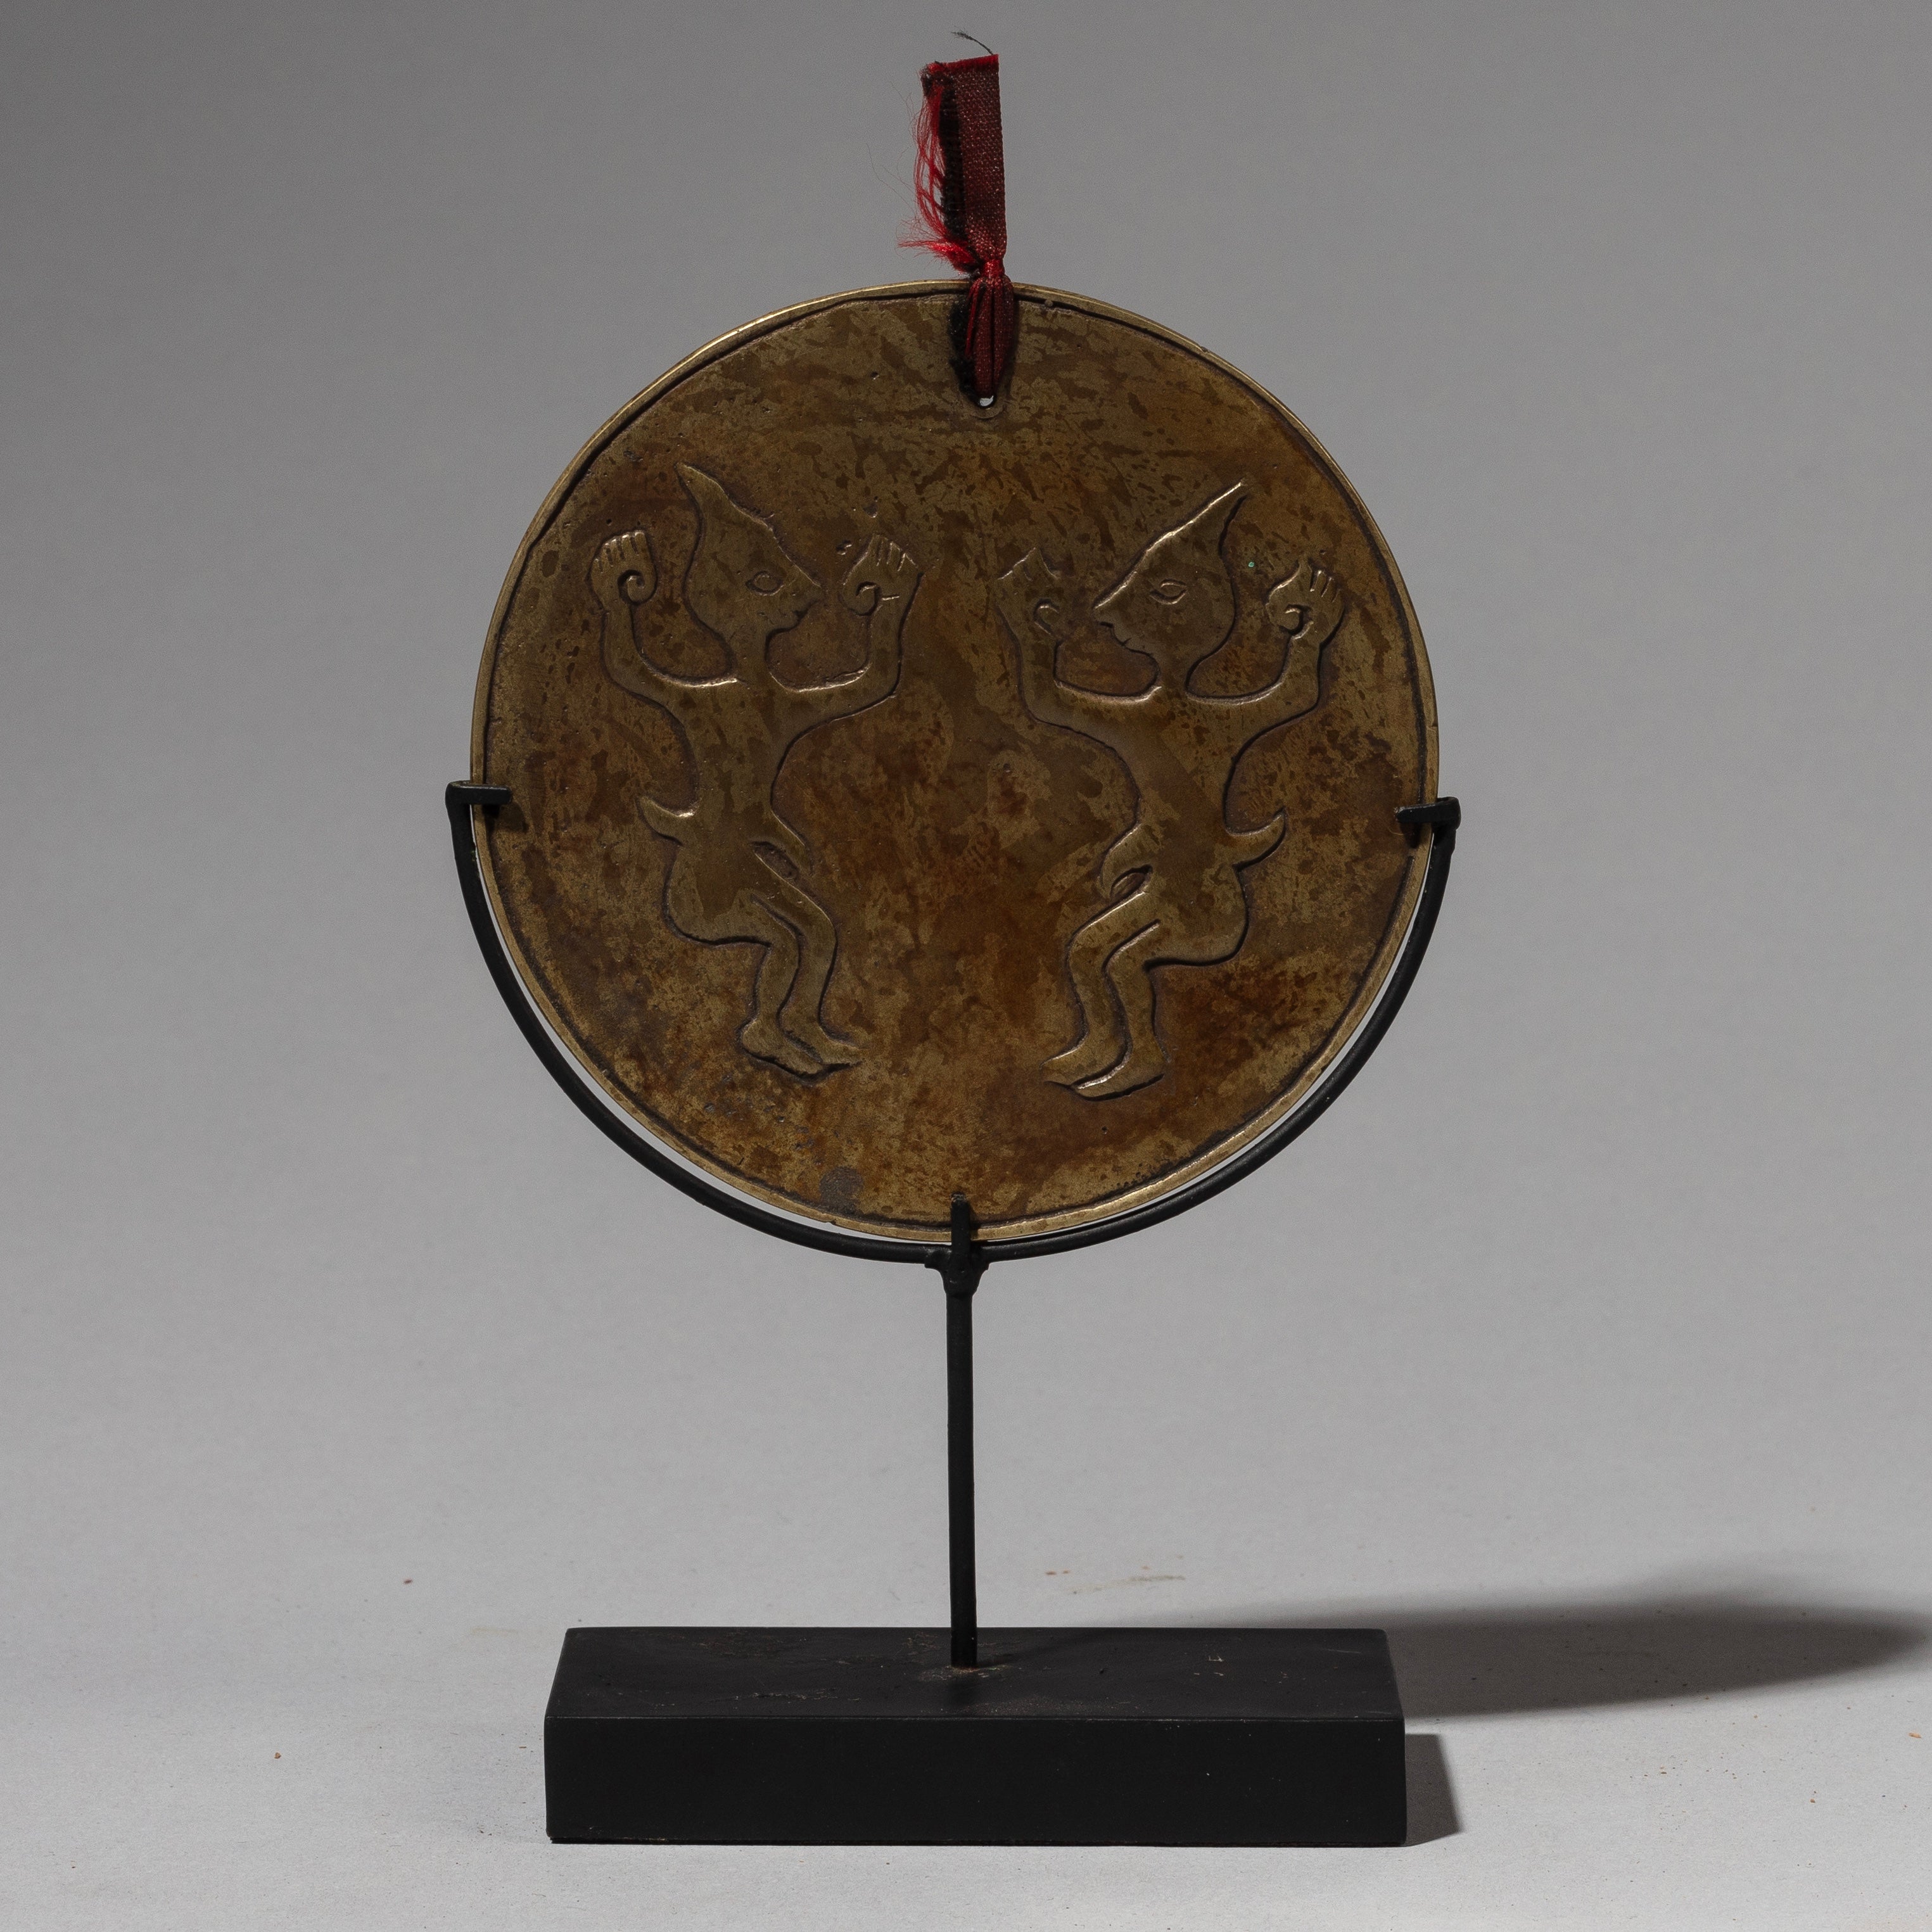 SOLD NB. A PRETTY PECTORAL DISC FROM NIAS PEOPLE, INDONESIA ( No 1894)